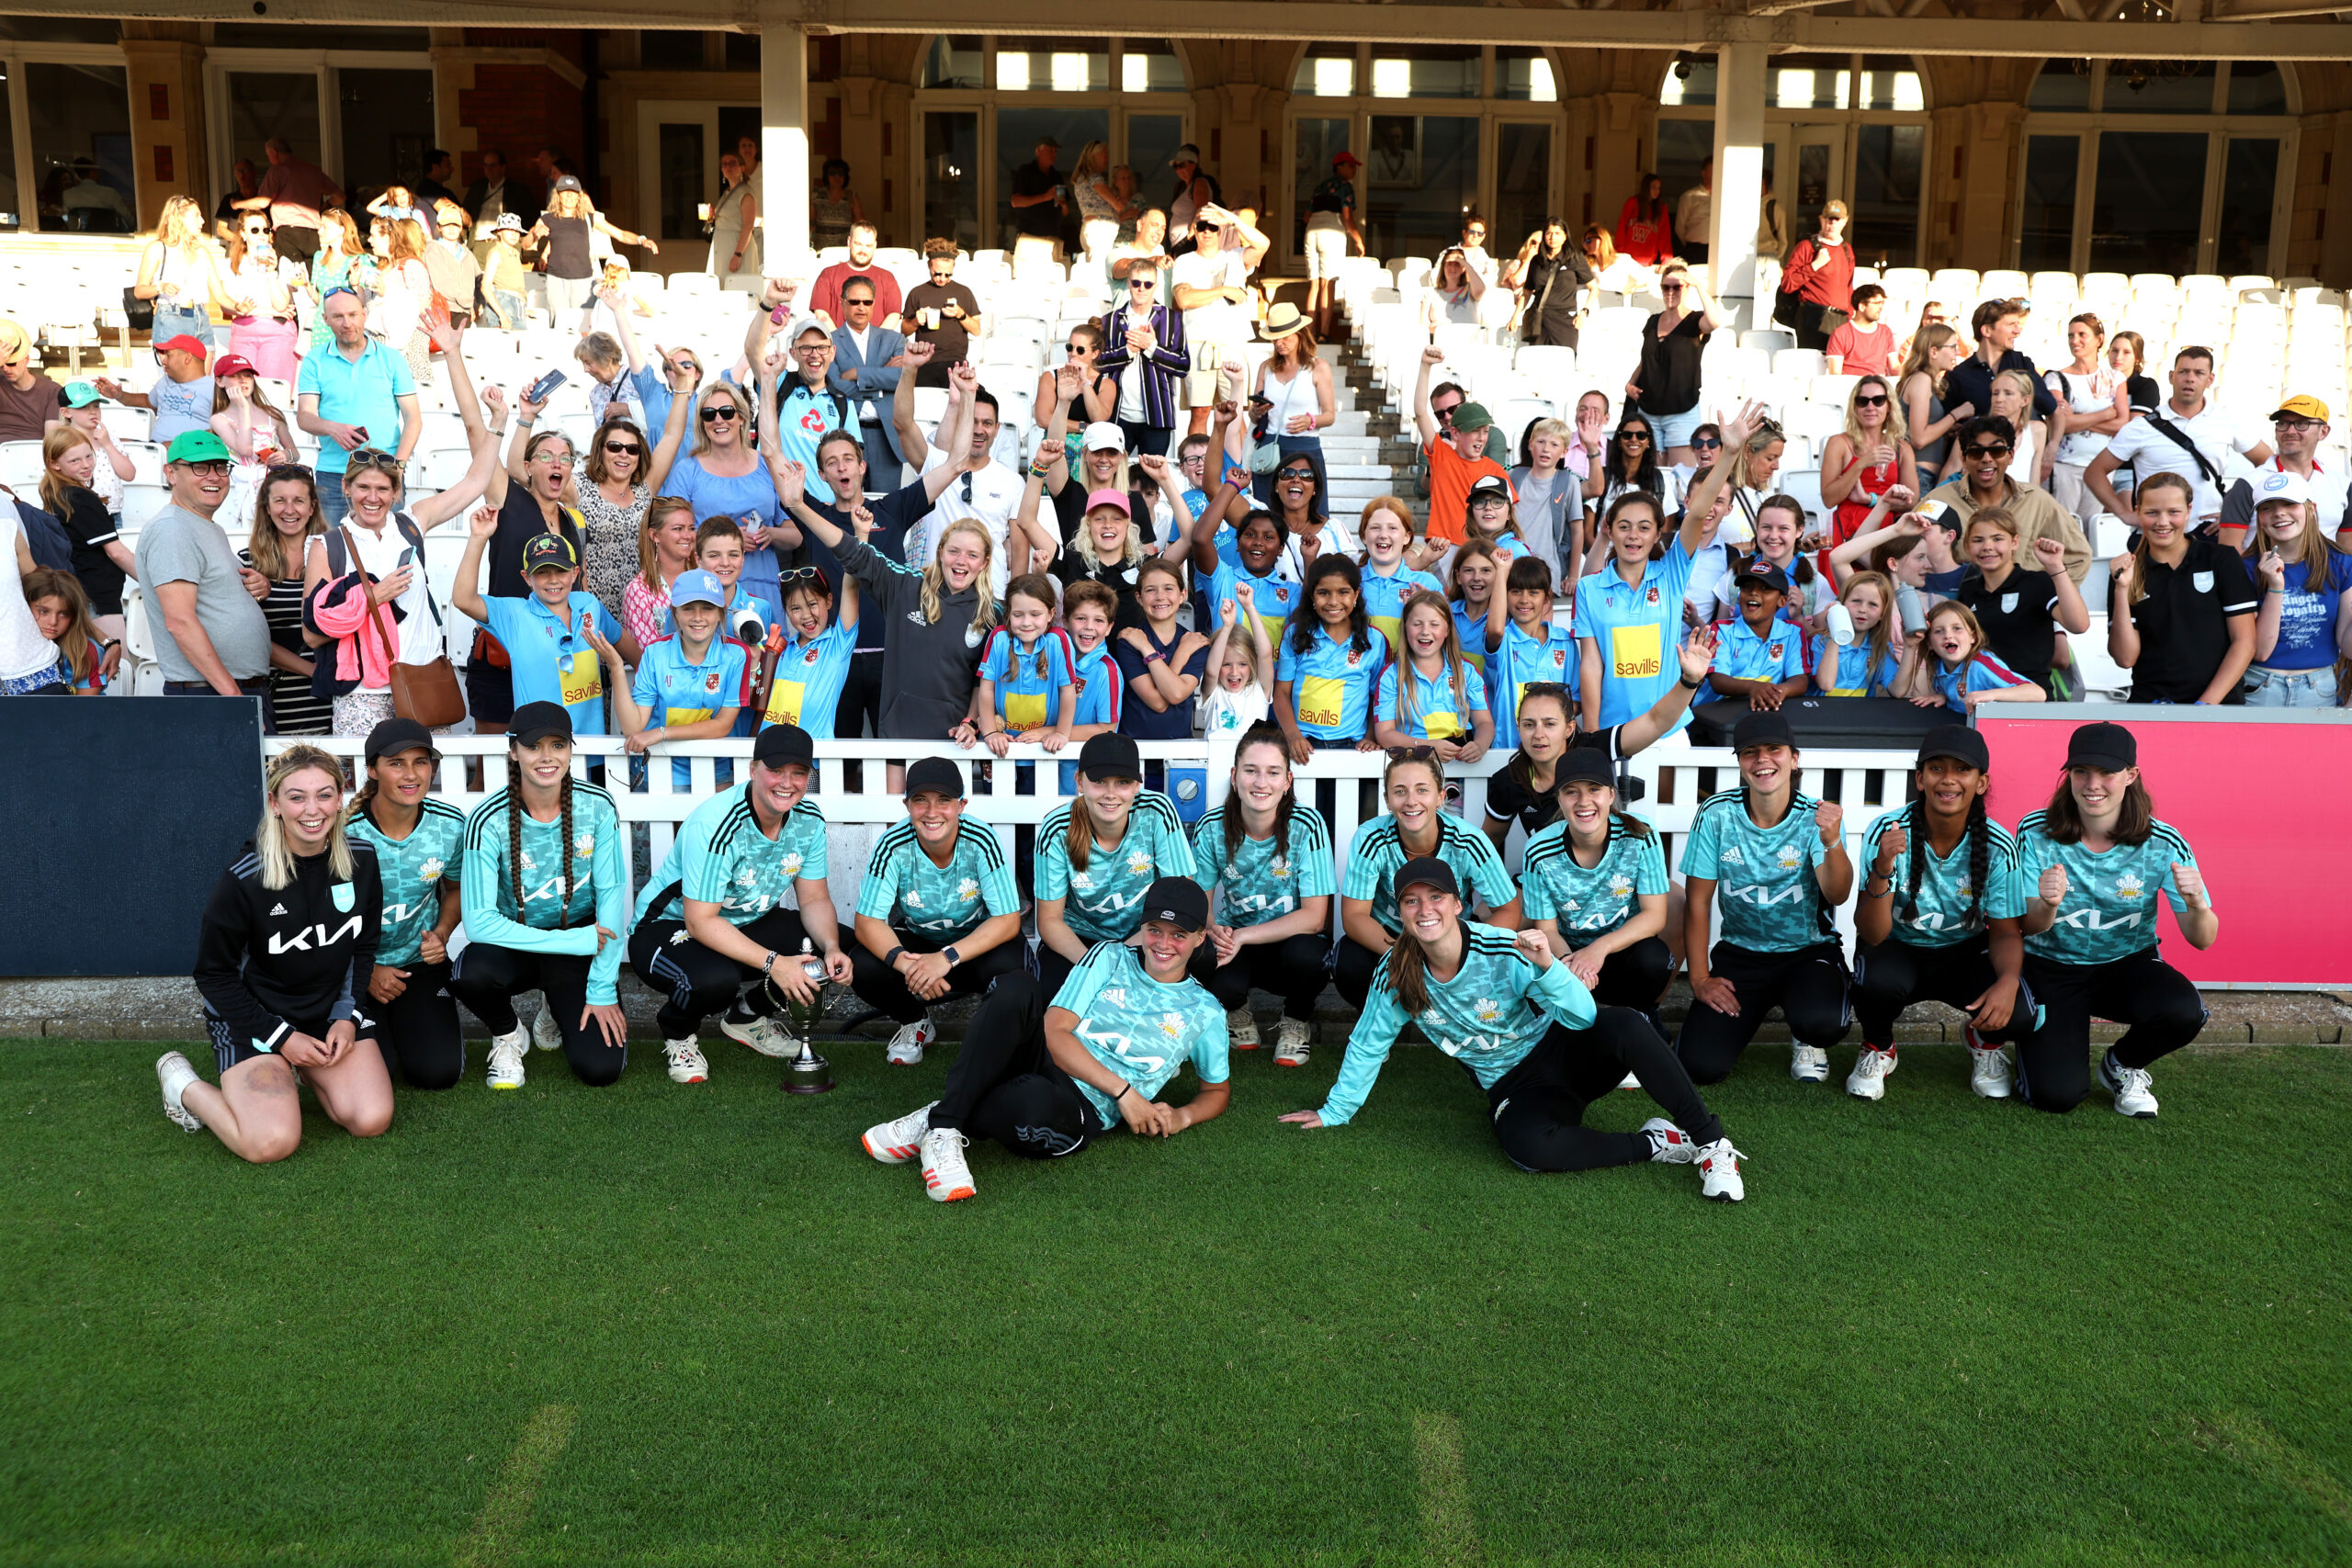 London Cup returns to The Kia Oval